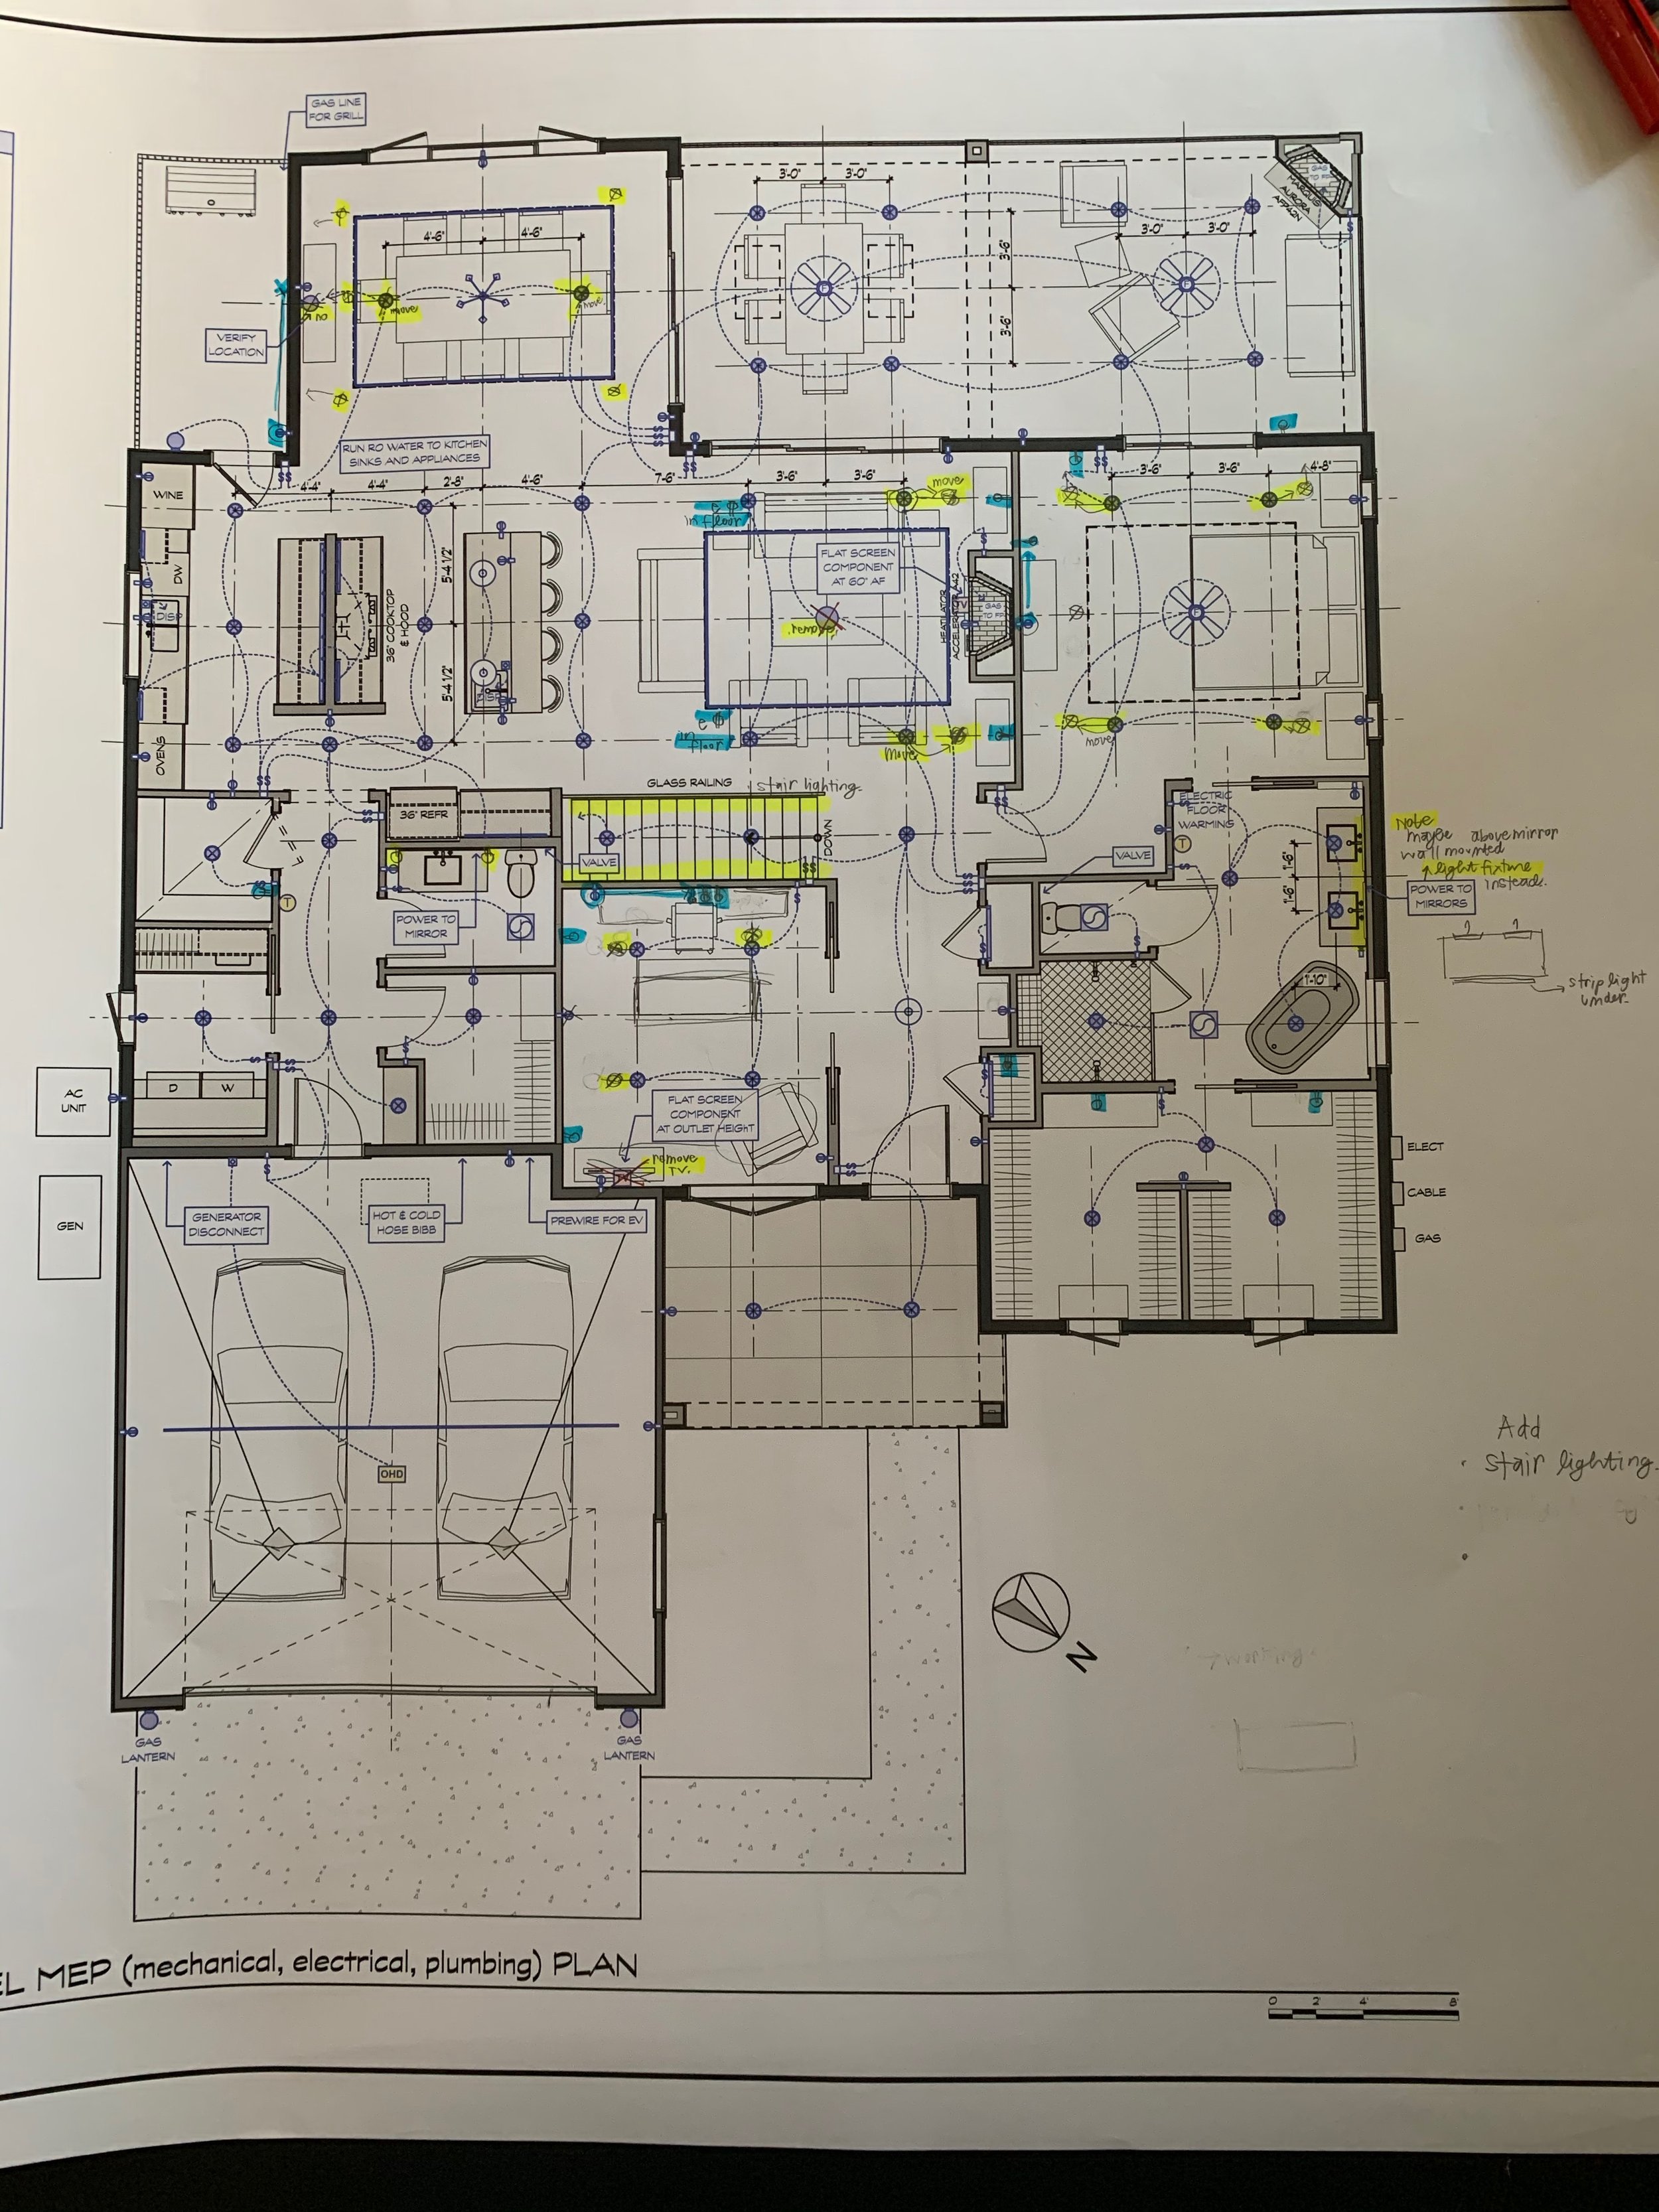 Bains Floor Plans with electric notes.jpeg